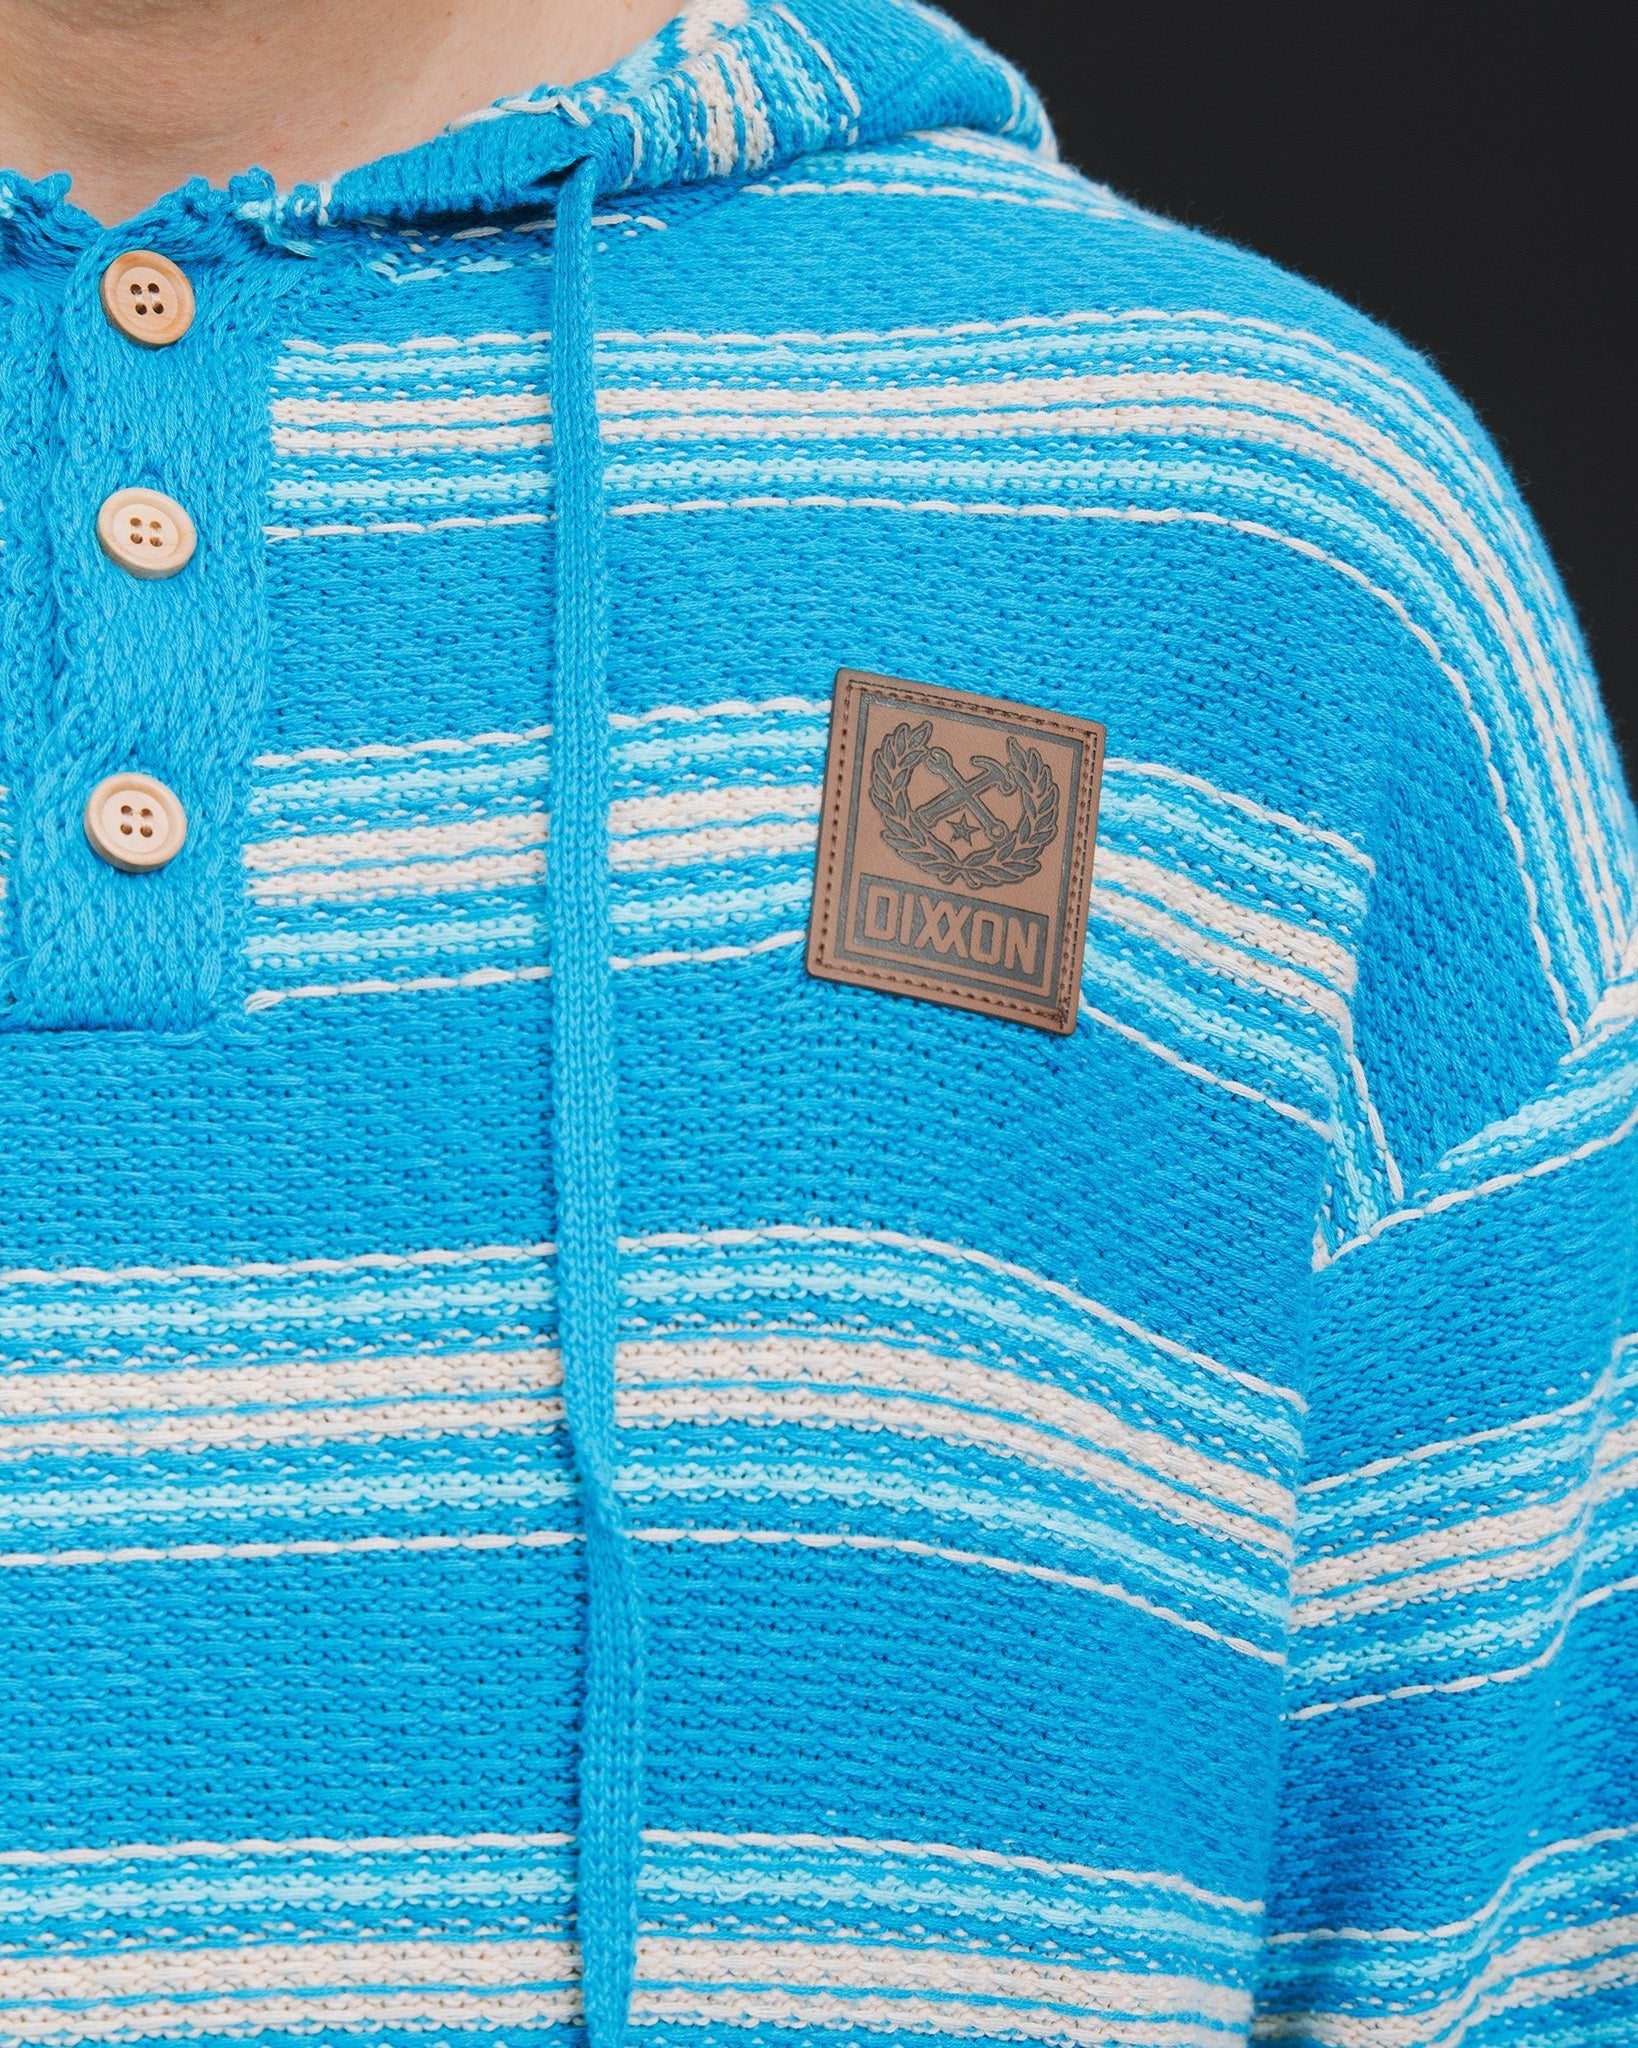 The Smuggler Hoodie - Blue & White - Dixxon Flannel Co.